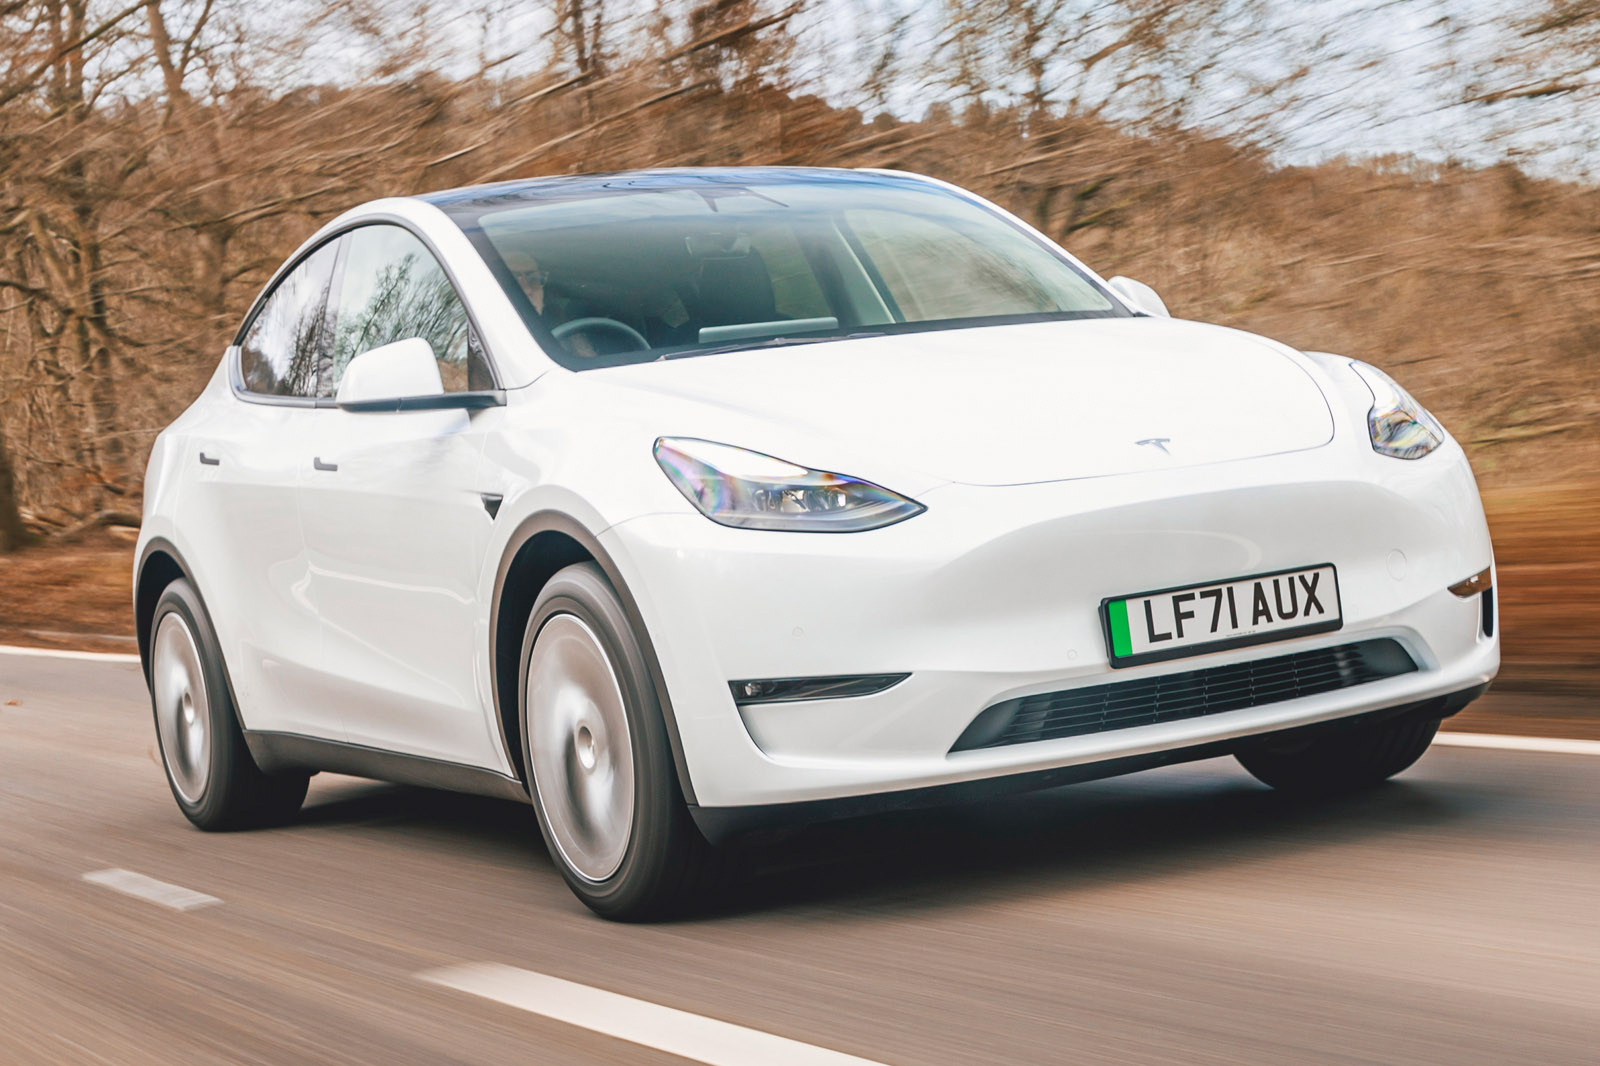 Redesigned Tesla Model Y On Track To Debut In Mid 2024: Report